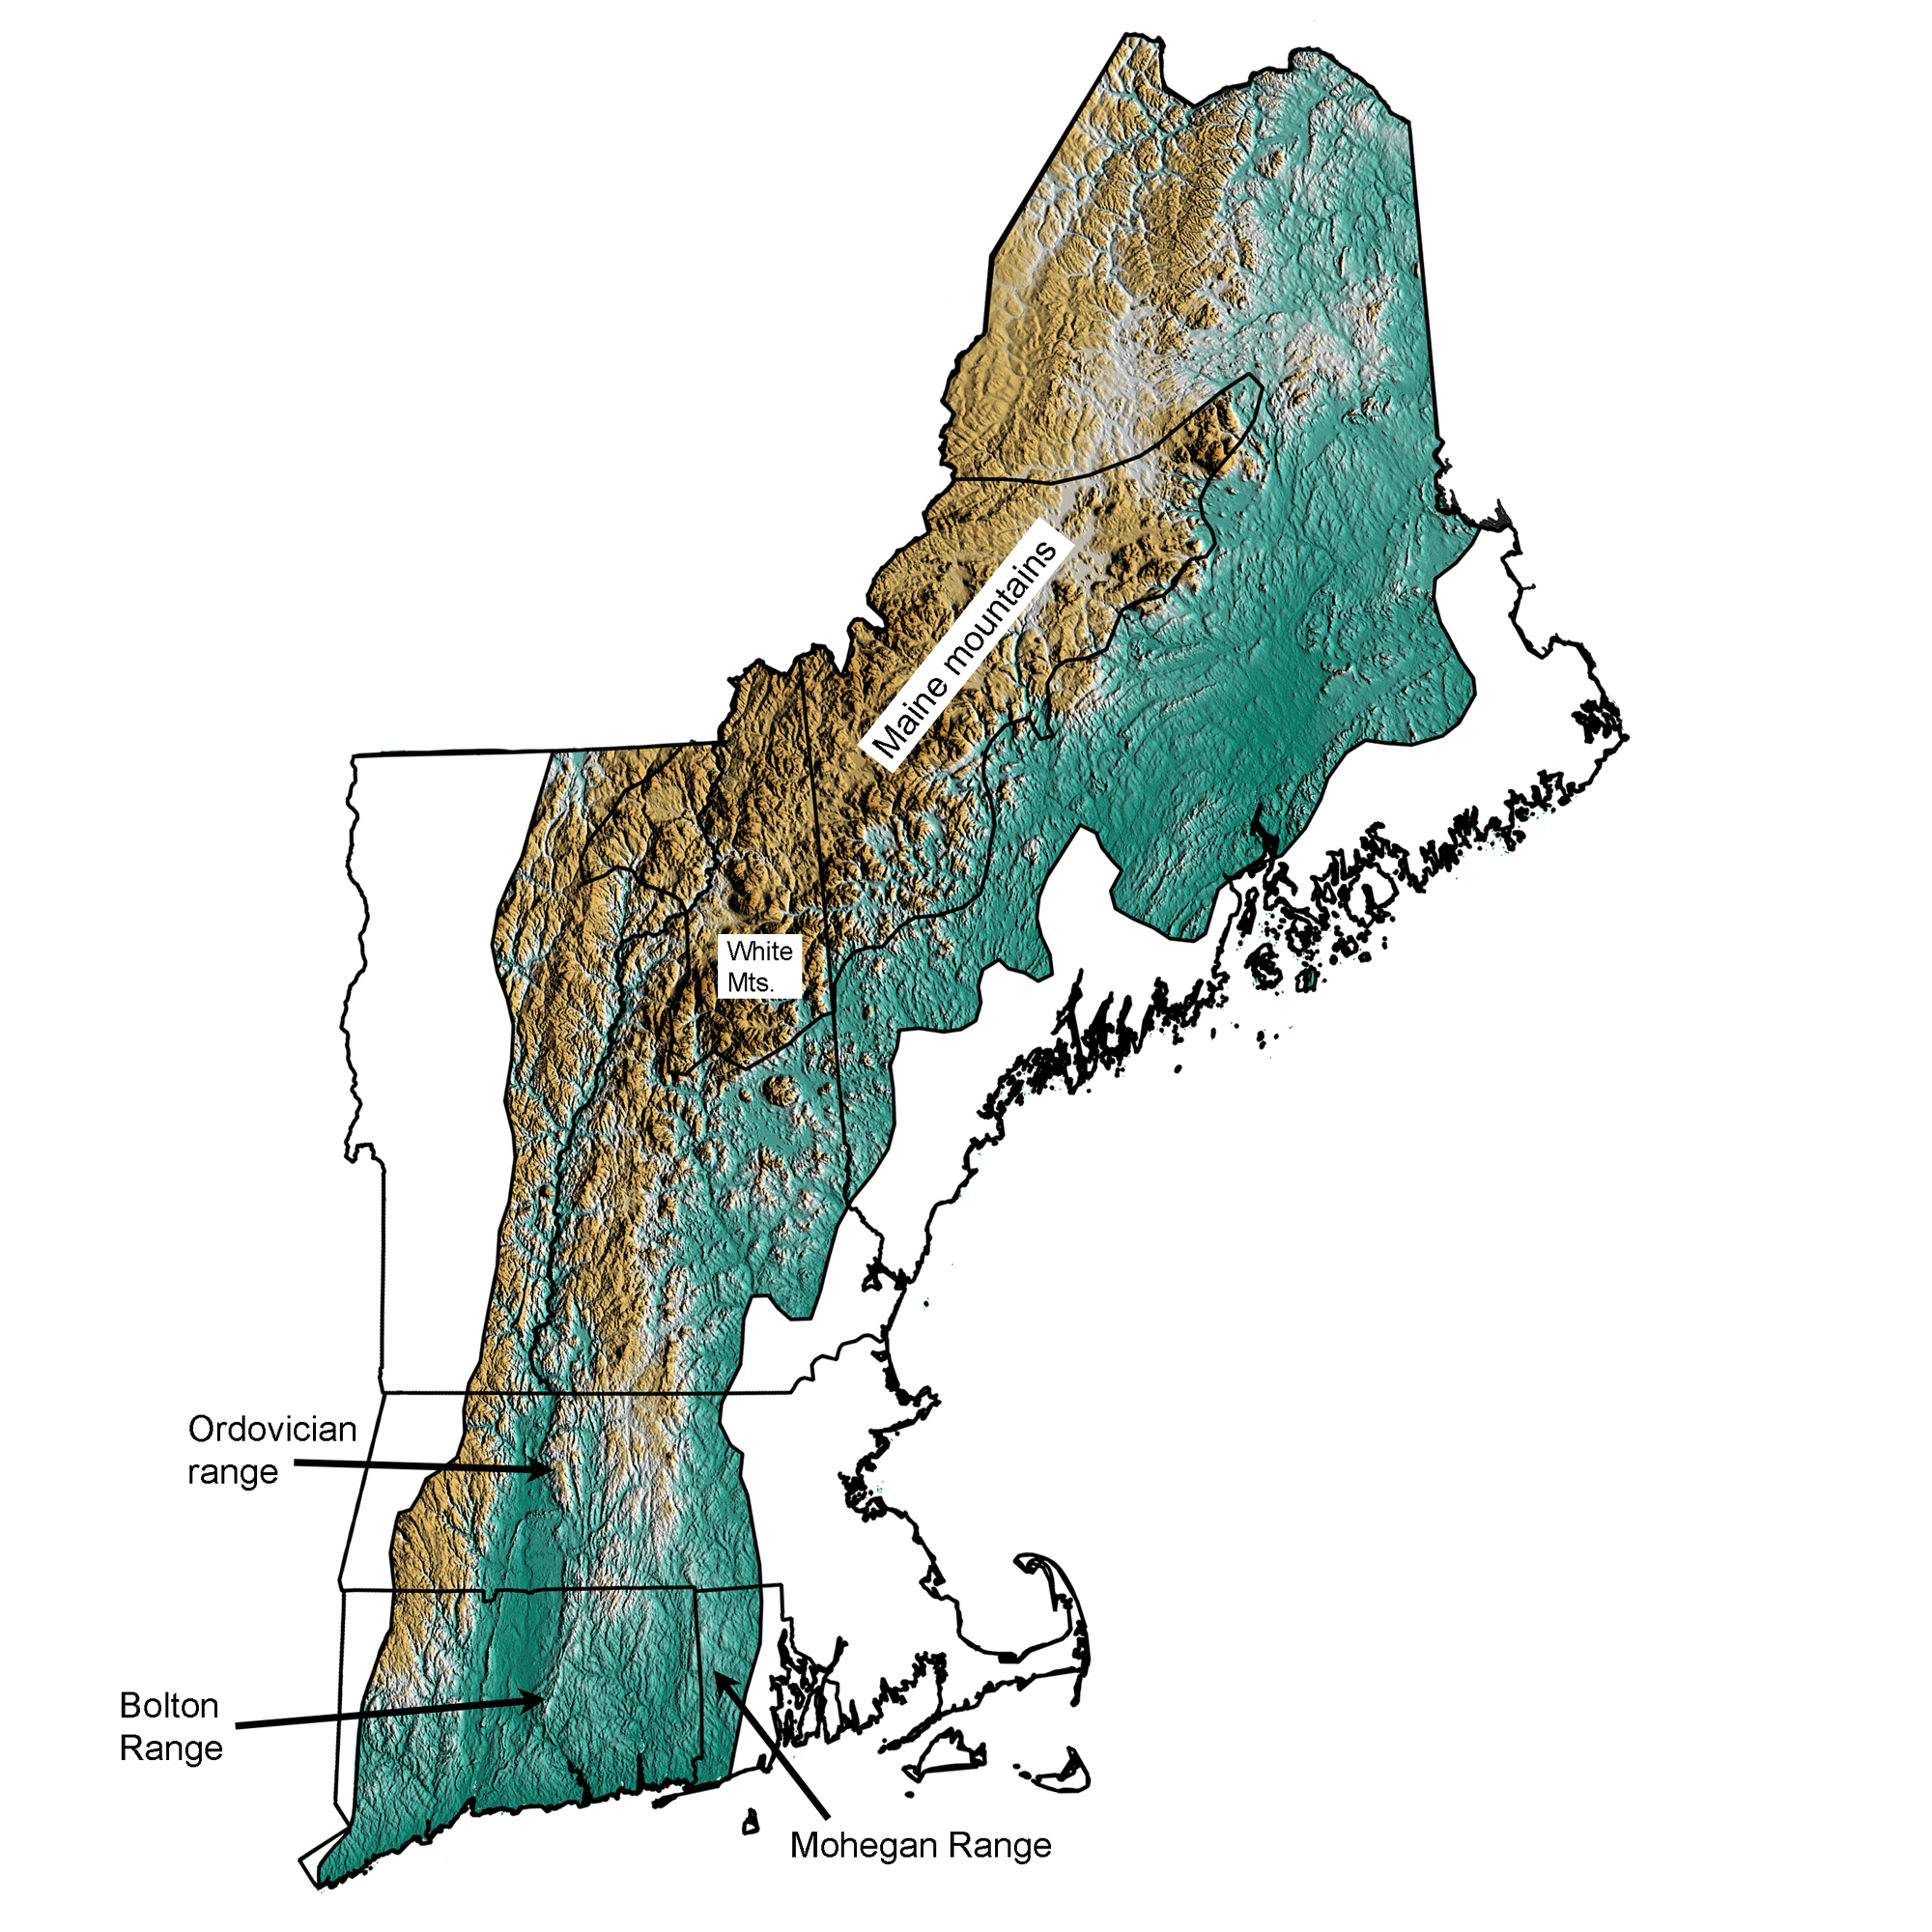 Topographic map of the New England Uplands region of the Exotic Terrane.